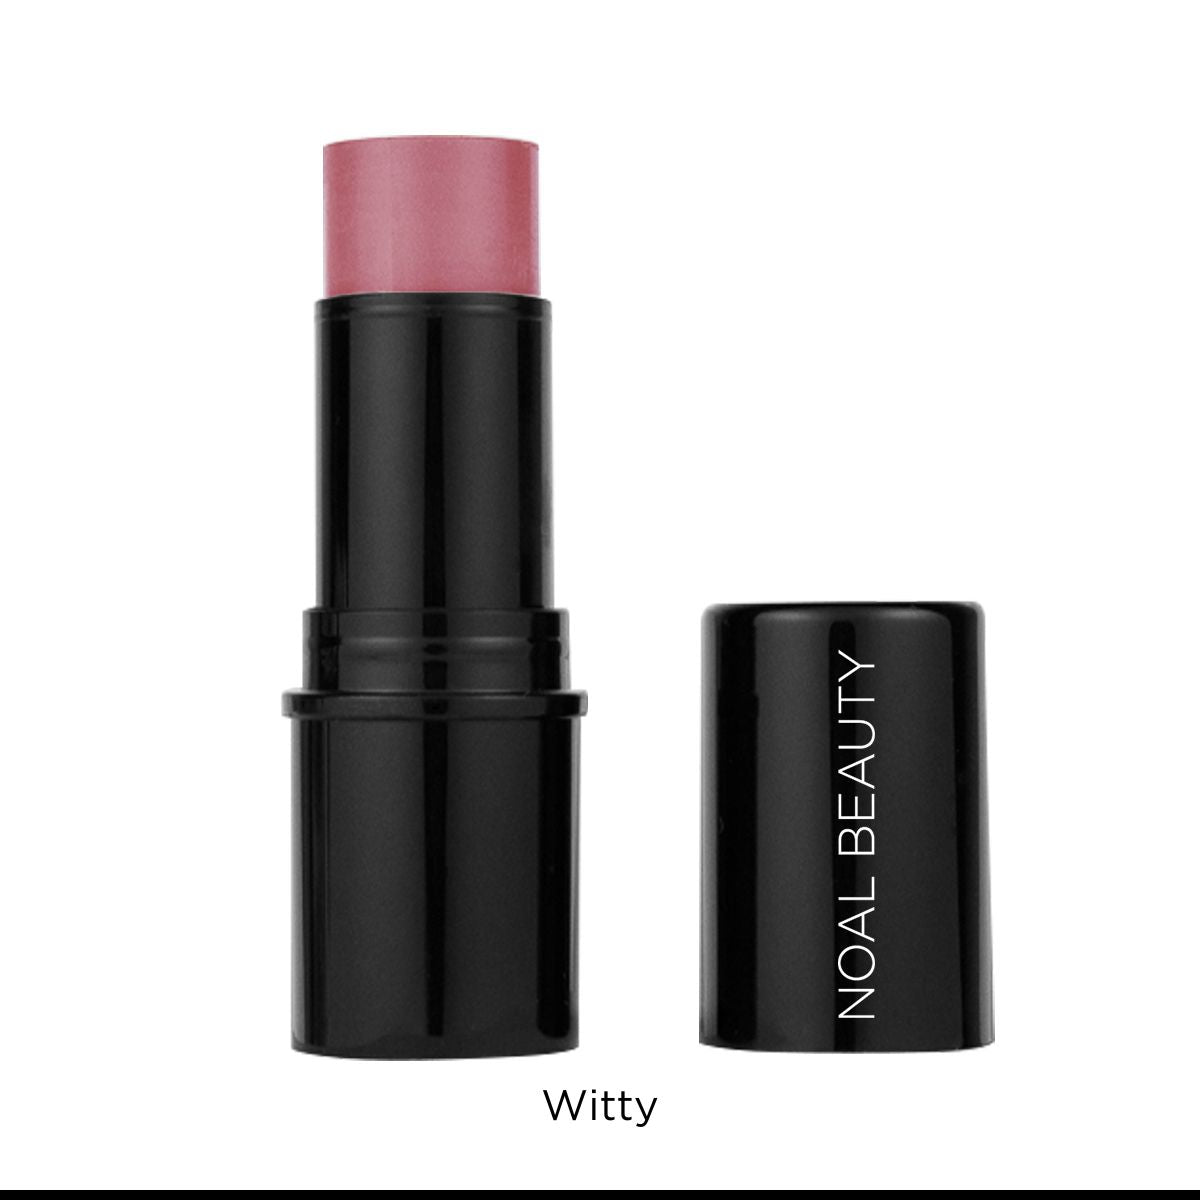 noal-beauty-witty-3-in-1-color-stick-lips-eyes-cheeks